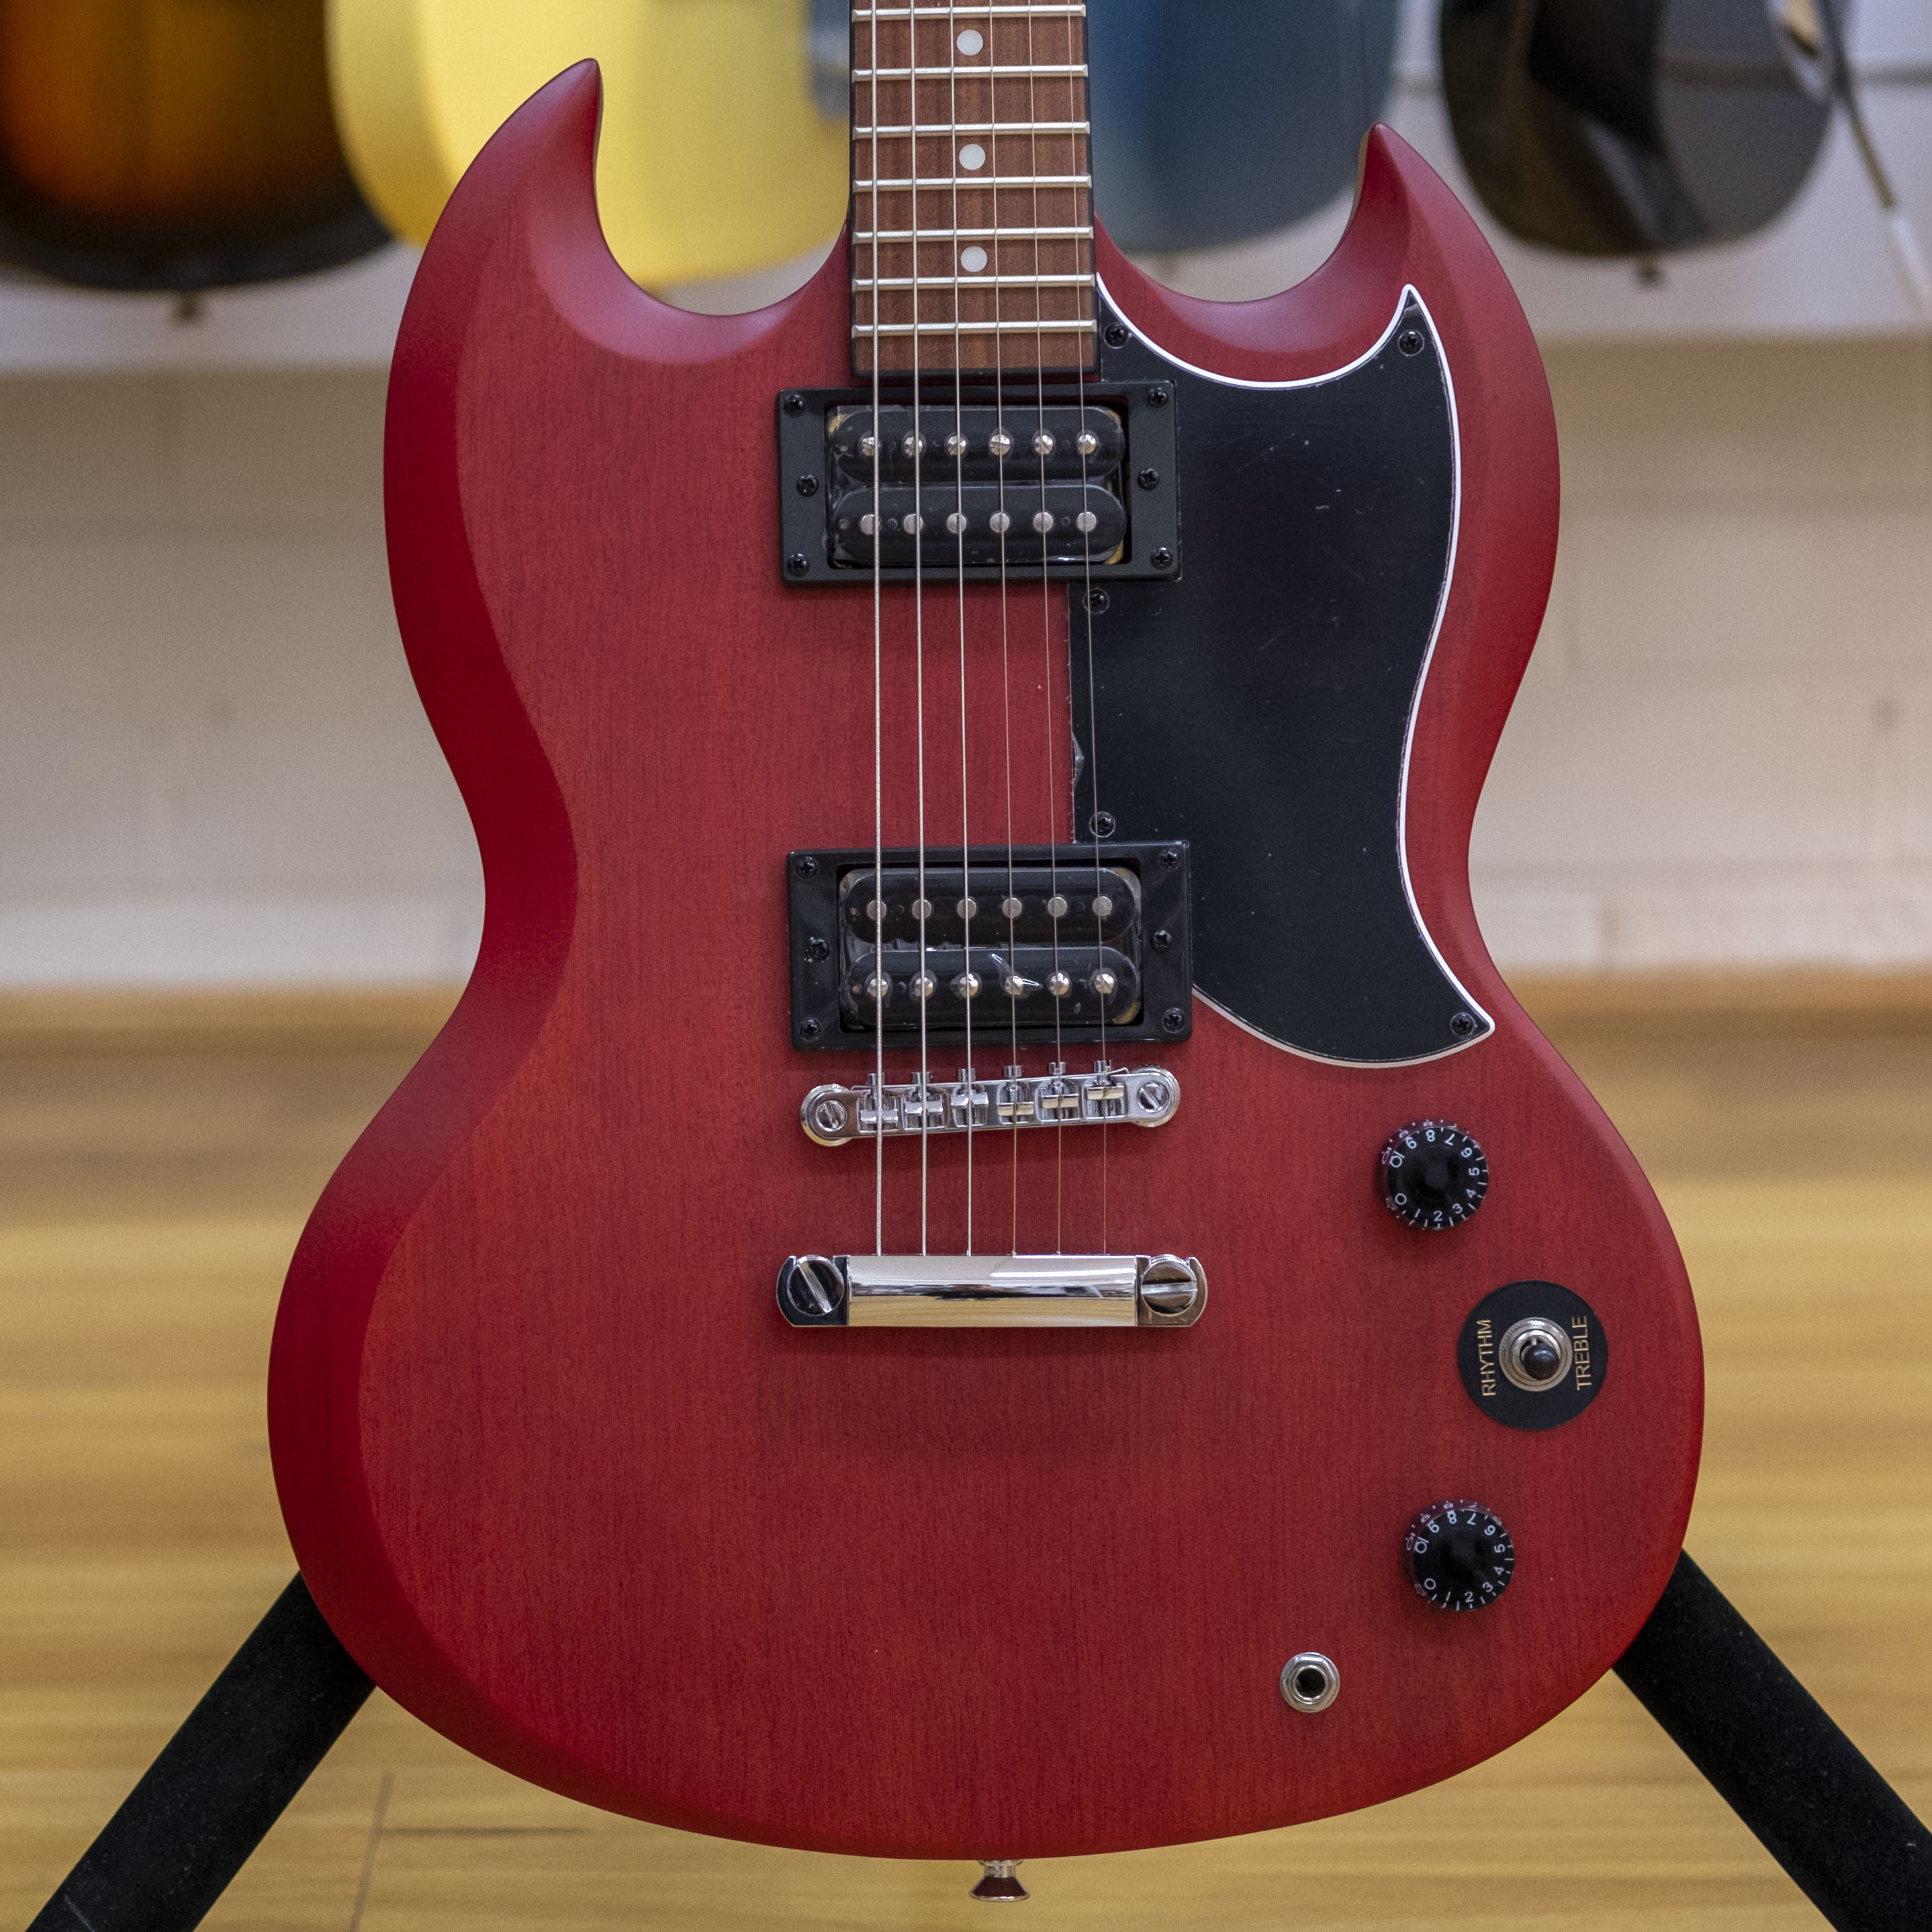 Epiphone SG Special Satin E1 Electric Guitar (Worn Heritage Cherry)